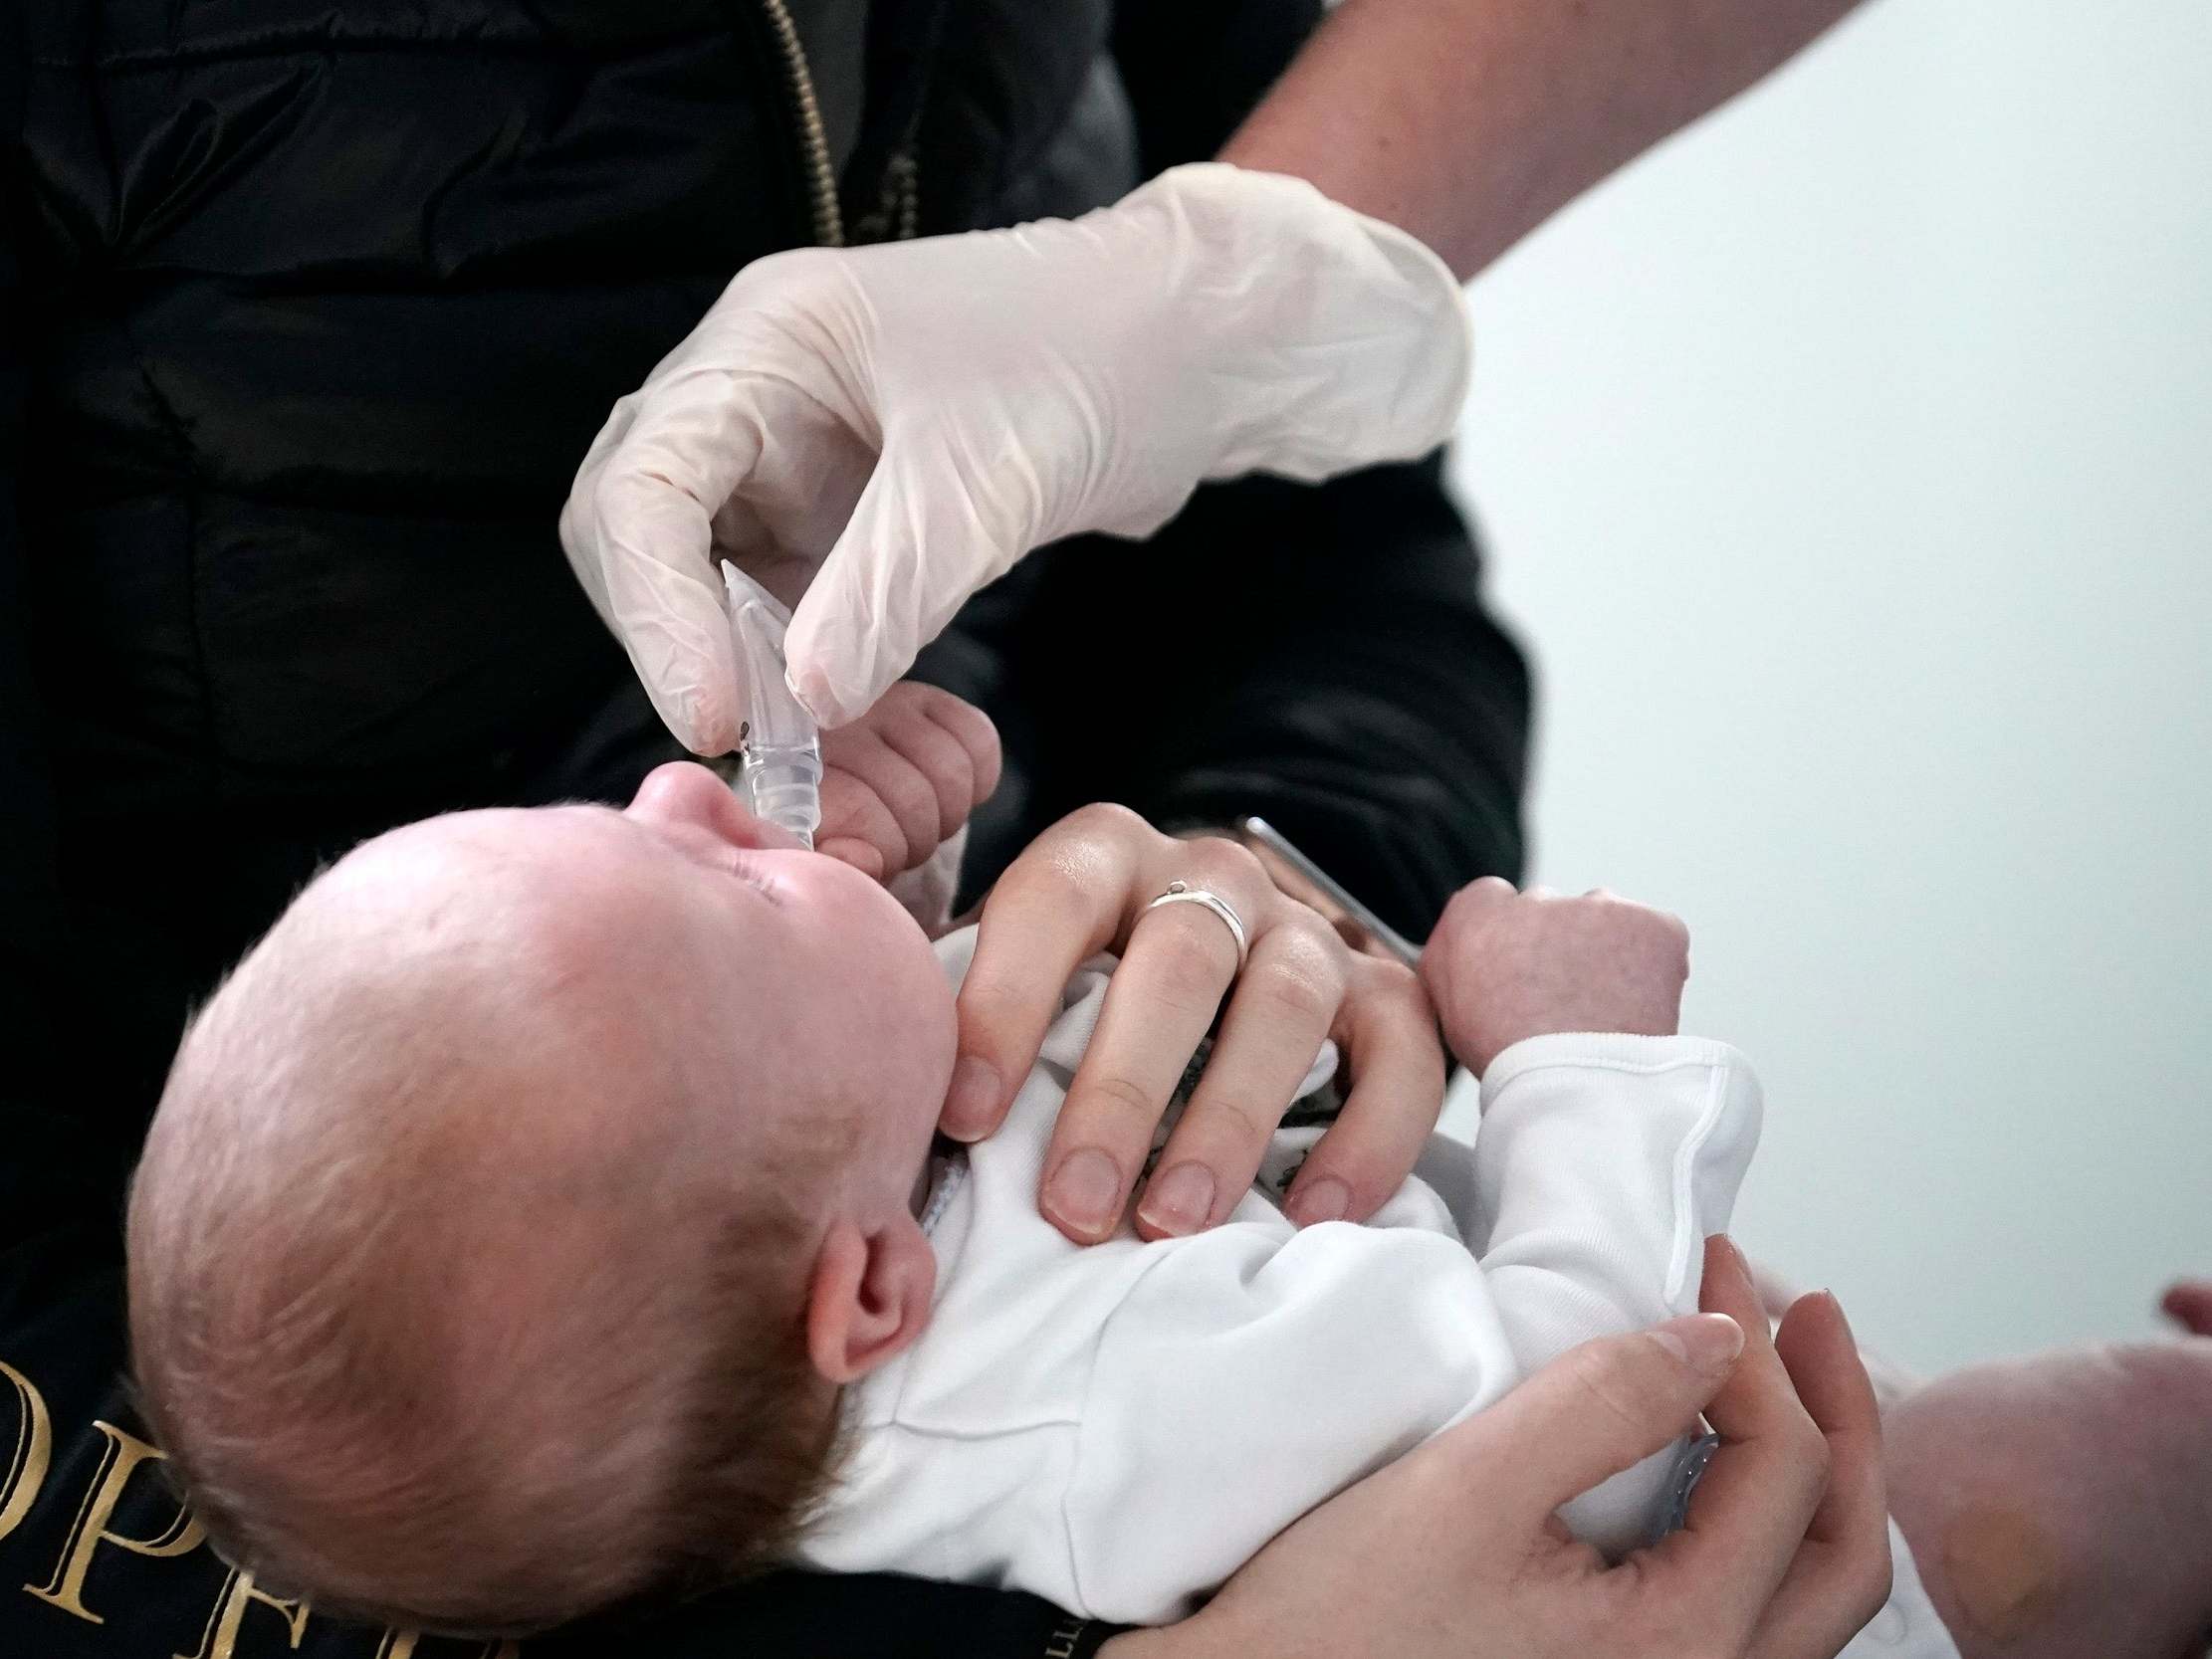 A nurse gives a baby some medicine at a UK medical centre. Globally, 116 million births are expected in the nine months since the pandemic was declared